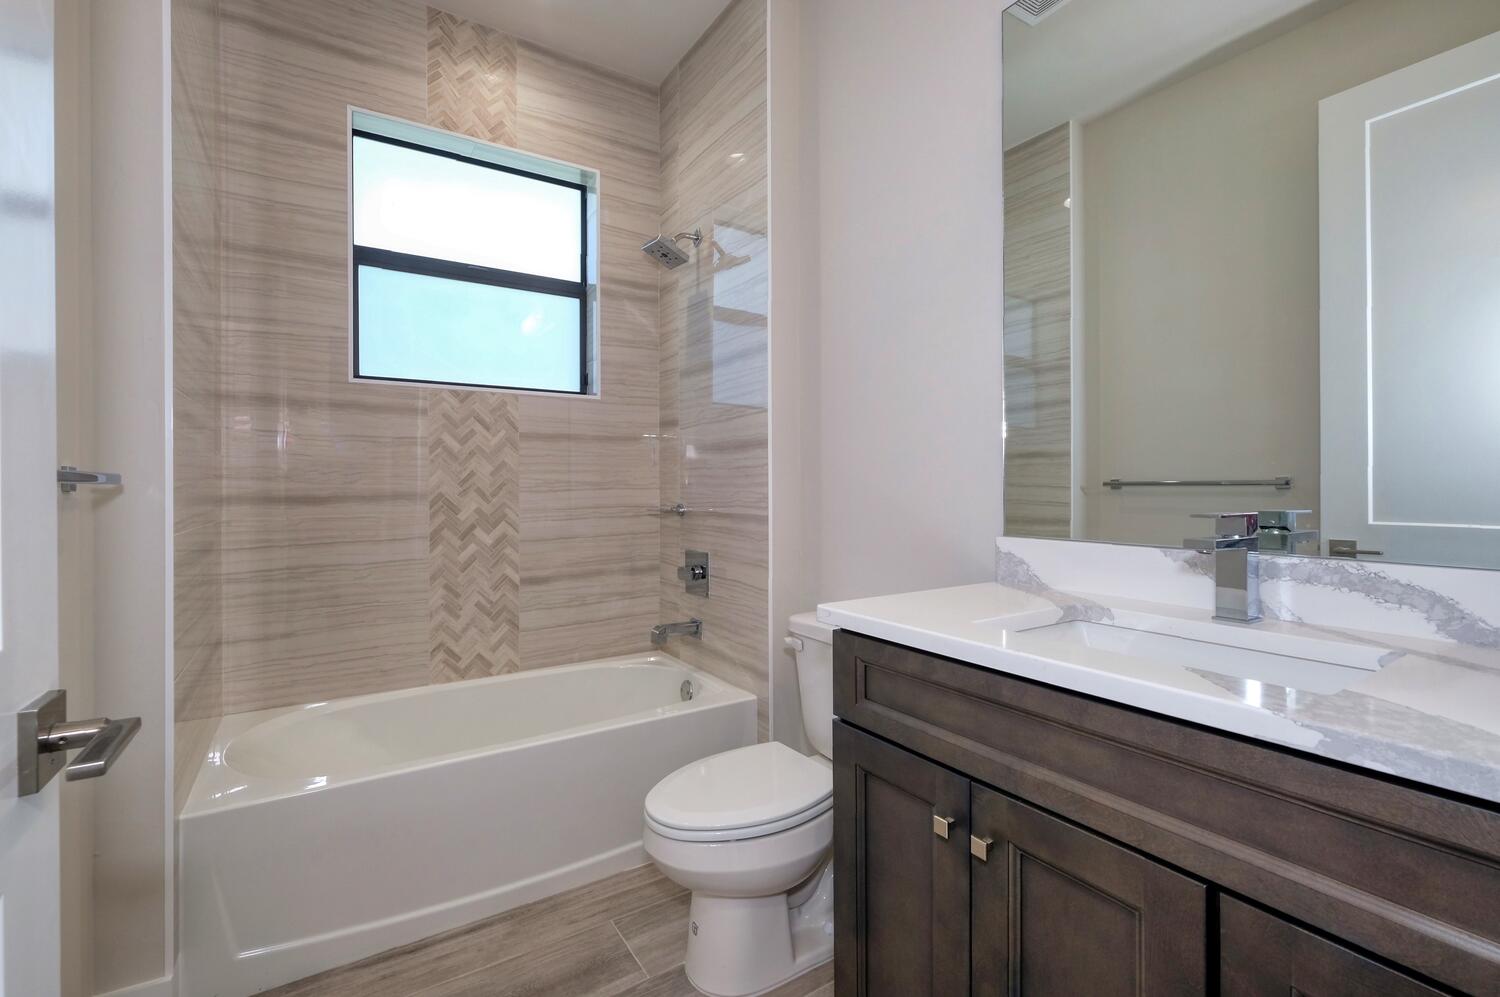 Picture of the guest bathroom 1 of the model home Serenity